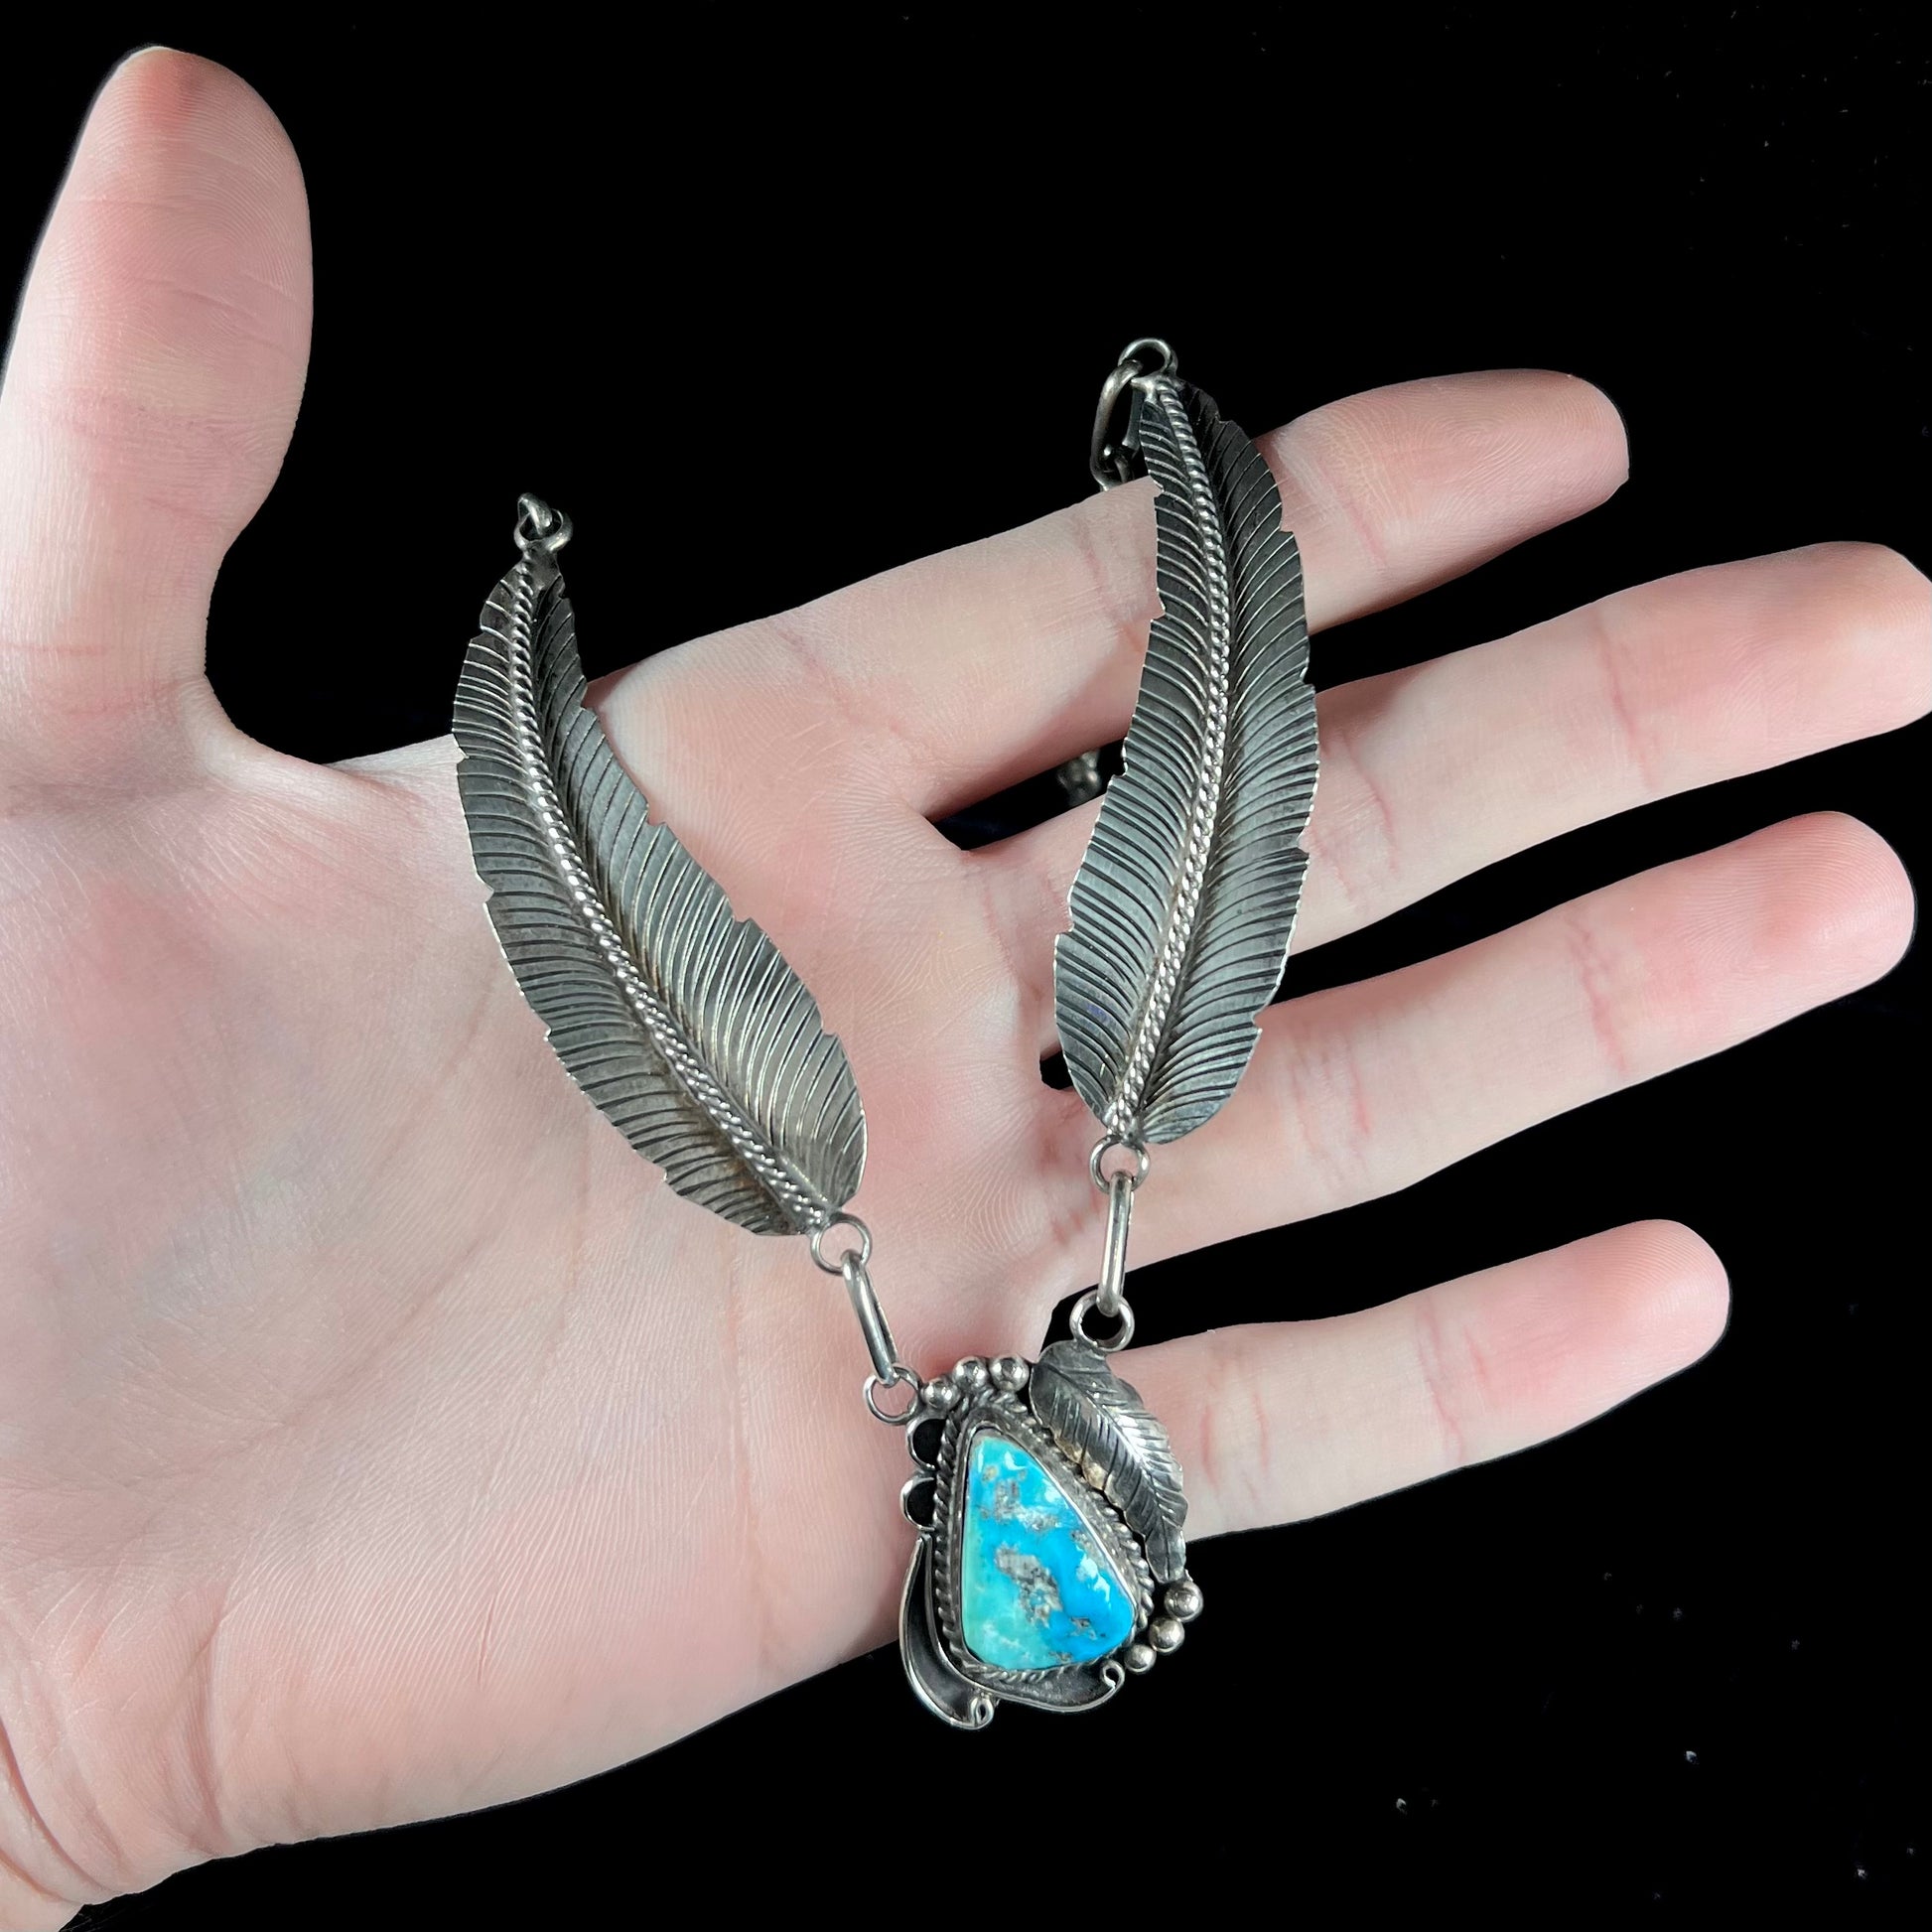 A sterling silver feather motif necklace set with a Sleeping Beauty turquoise stone, handmade by Navajo artist, Jameson Lee.